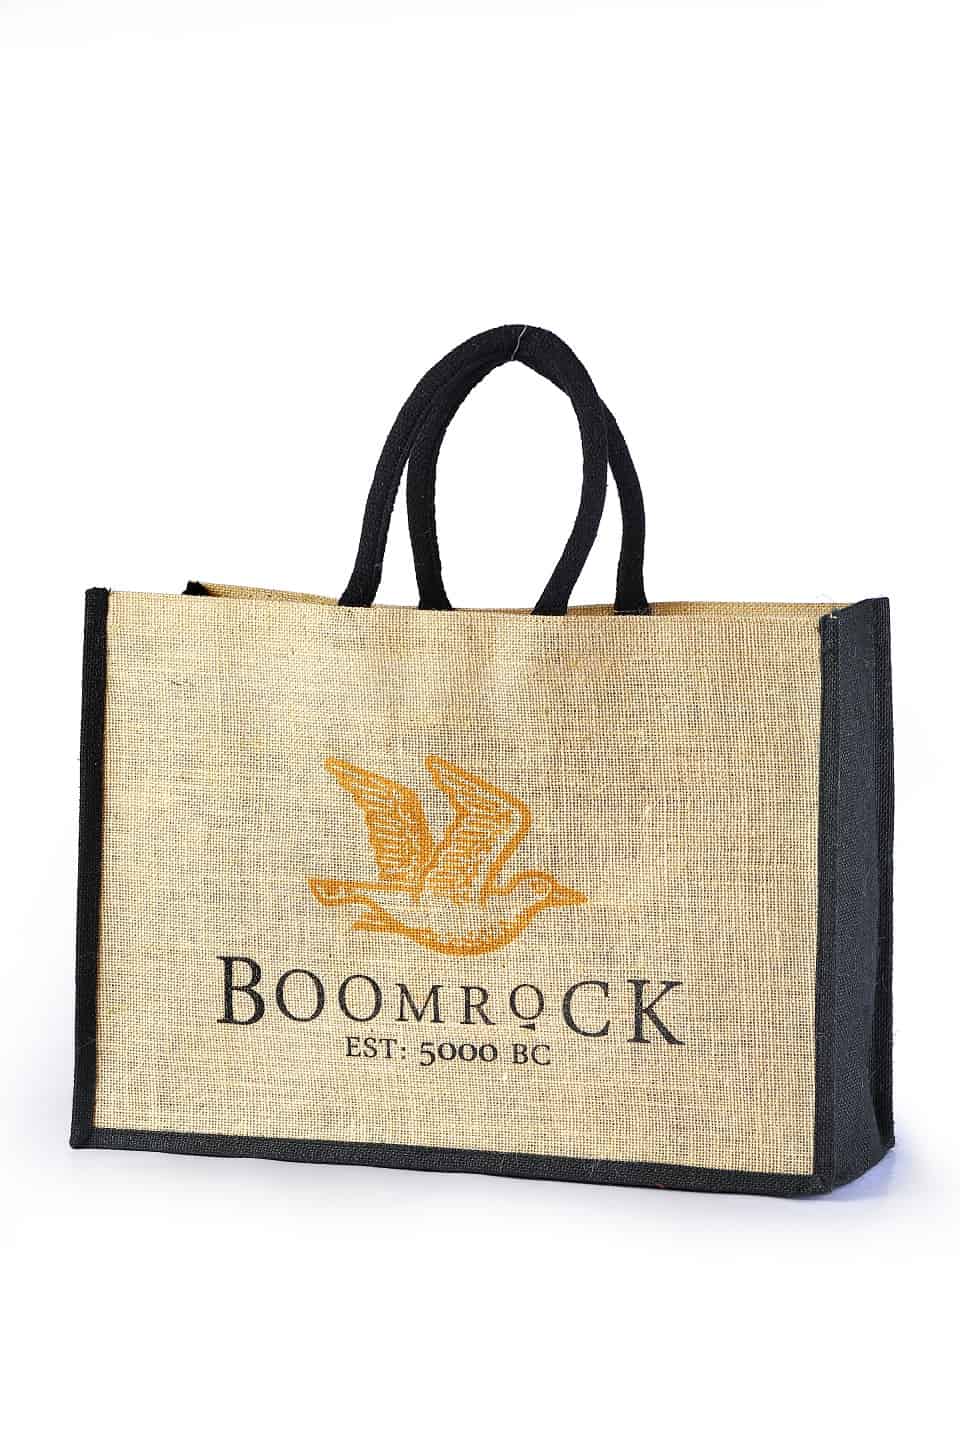 Jute Bags | Juco Bags Suppliers | Eco Friendly Juco Bags | Biodegradable Jute  Bags | Jute Bags Manufacturers in Sivakasi